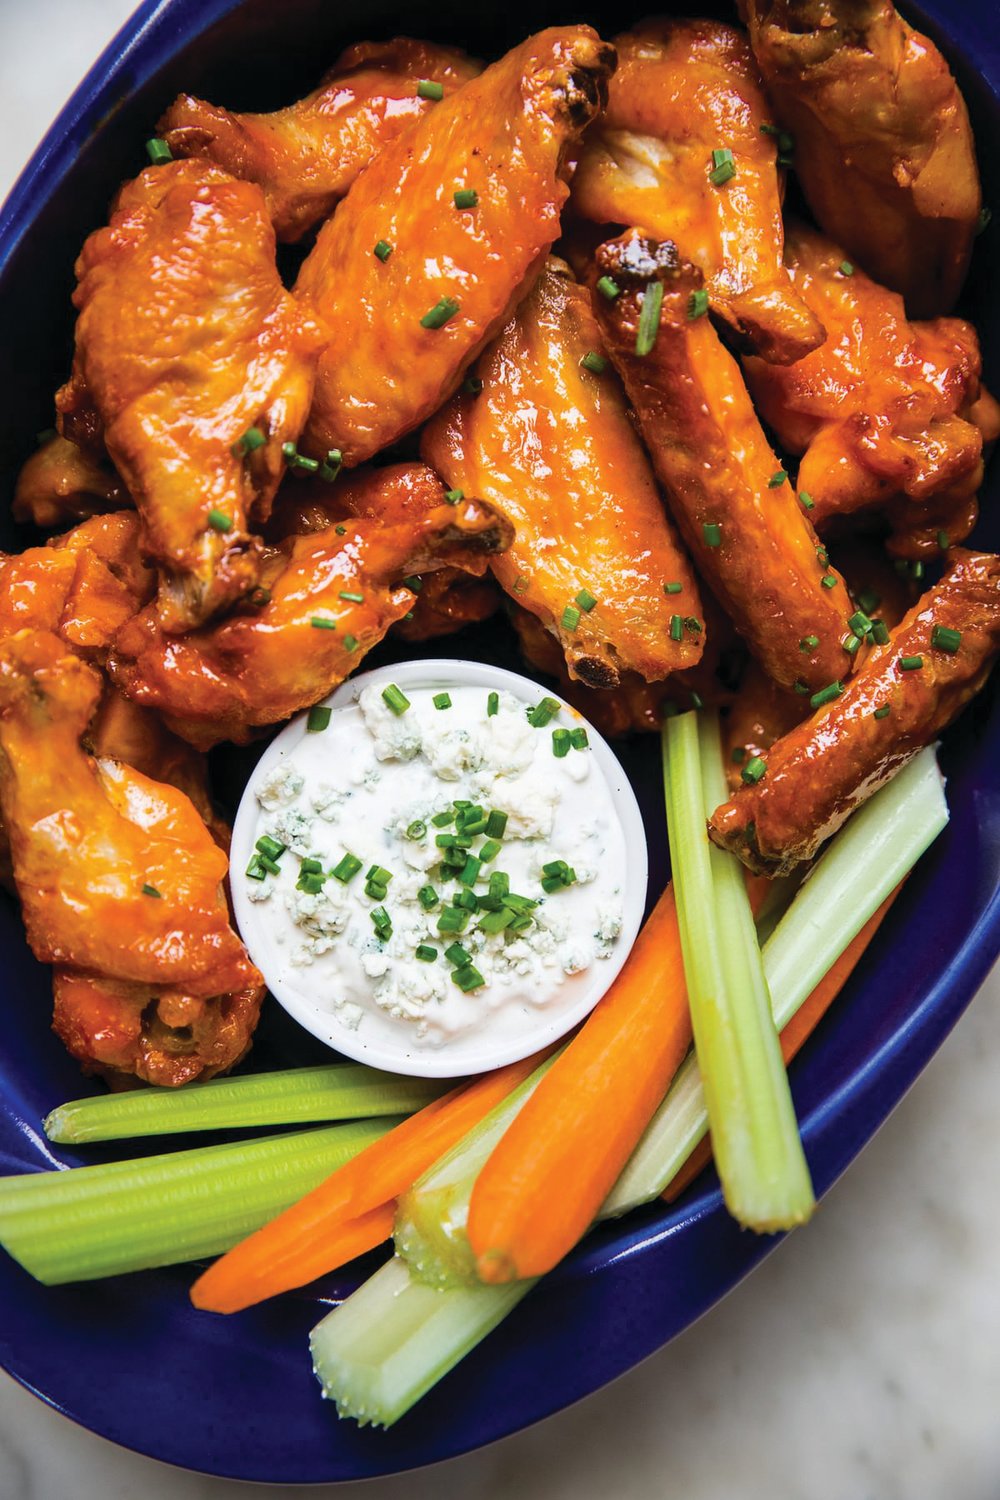 Themodernproper.com
Blue cheese or ranch dressings are good accompaniments for chicken wings, which are believed to be the most popular food served on Super Bowl Sunday.